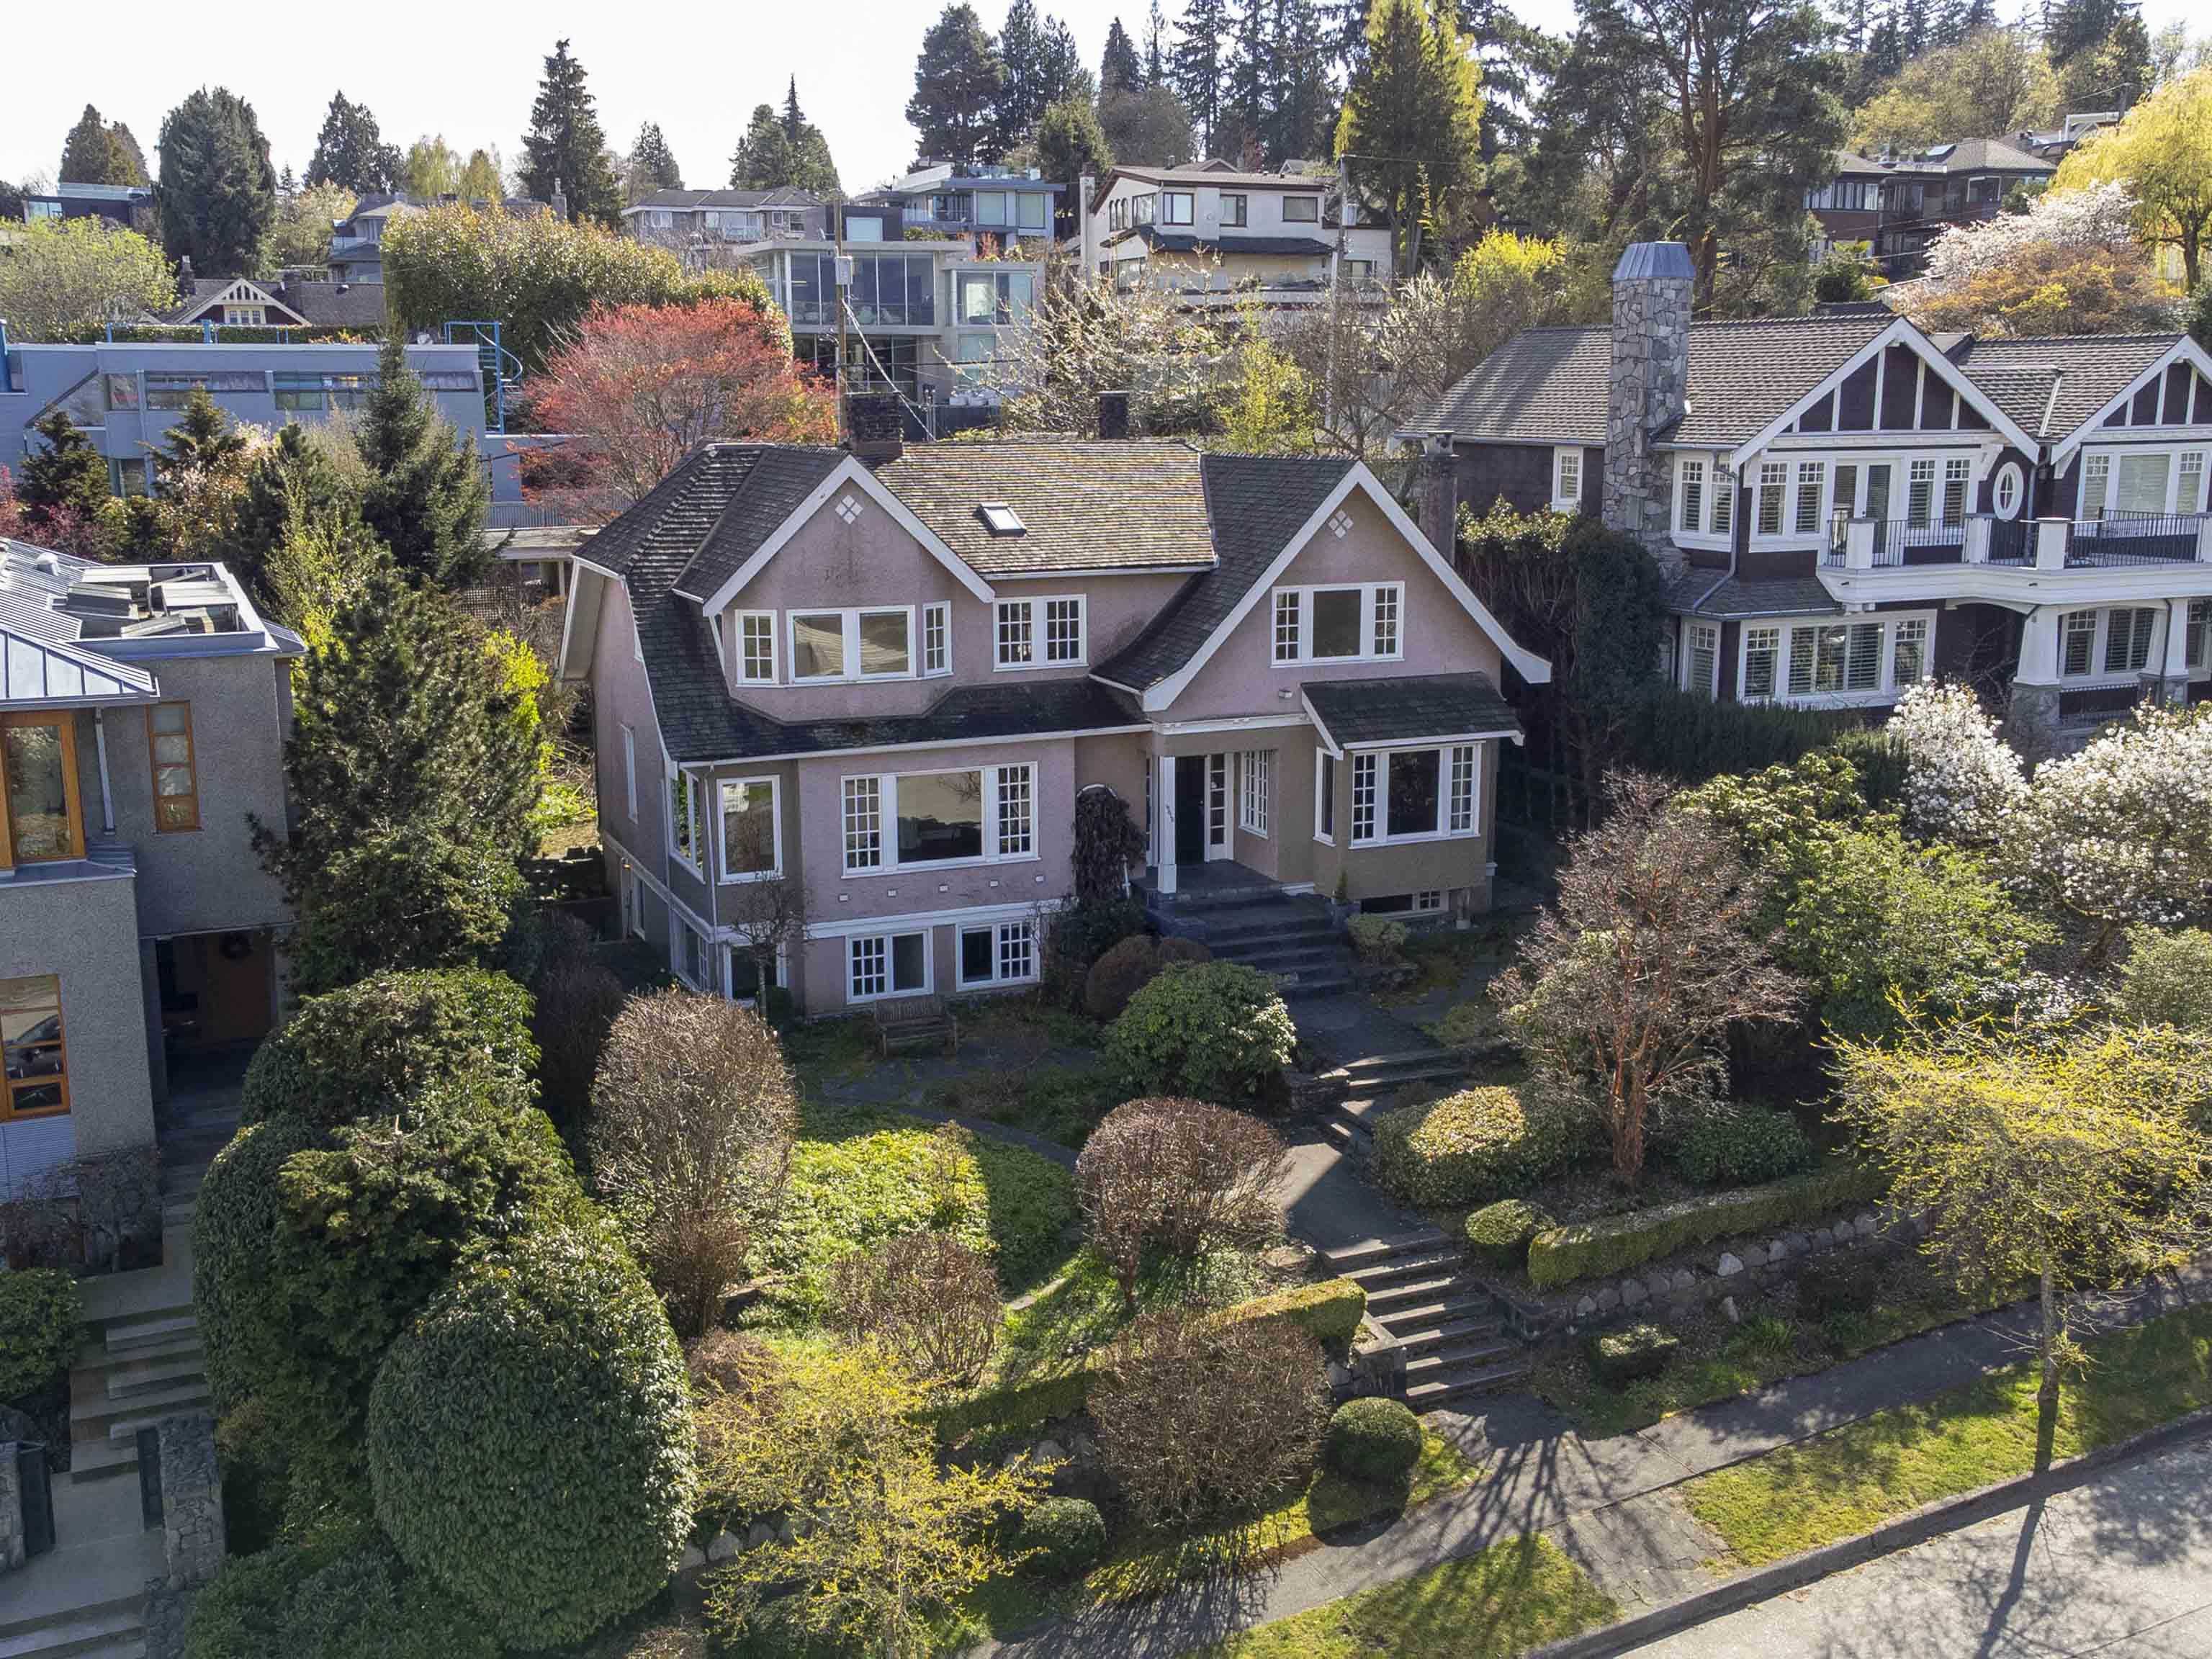 Point Grey House/Single Family for sale:  6 bedroom 4,819 sq.ft. (Listed 2106-02-06)